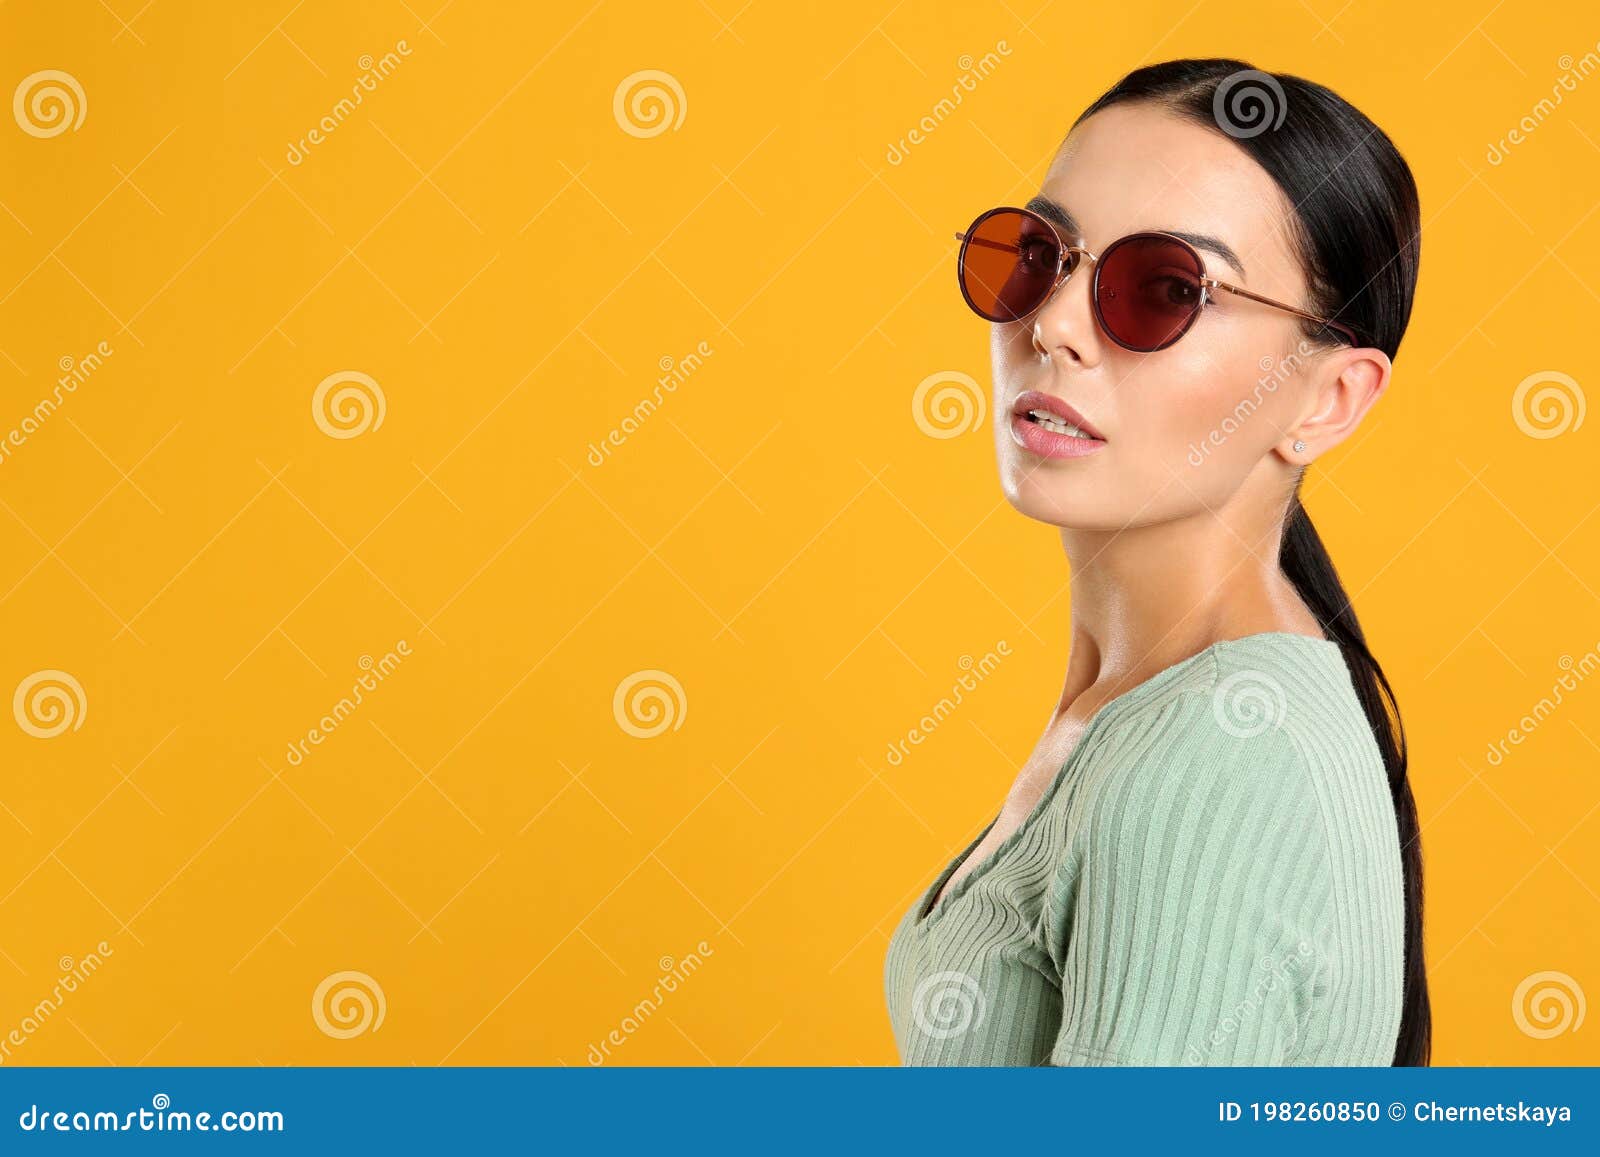 Beautiful Woman Wearing Sunglasses on Yellow Background. Space for Text ...